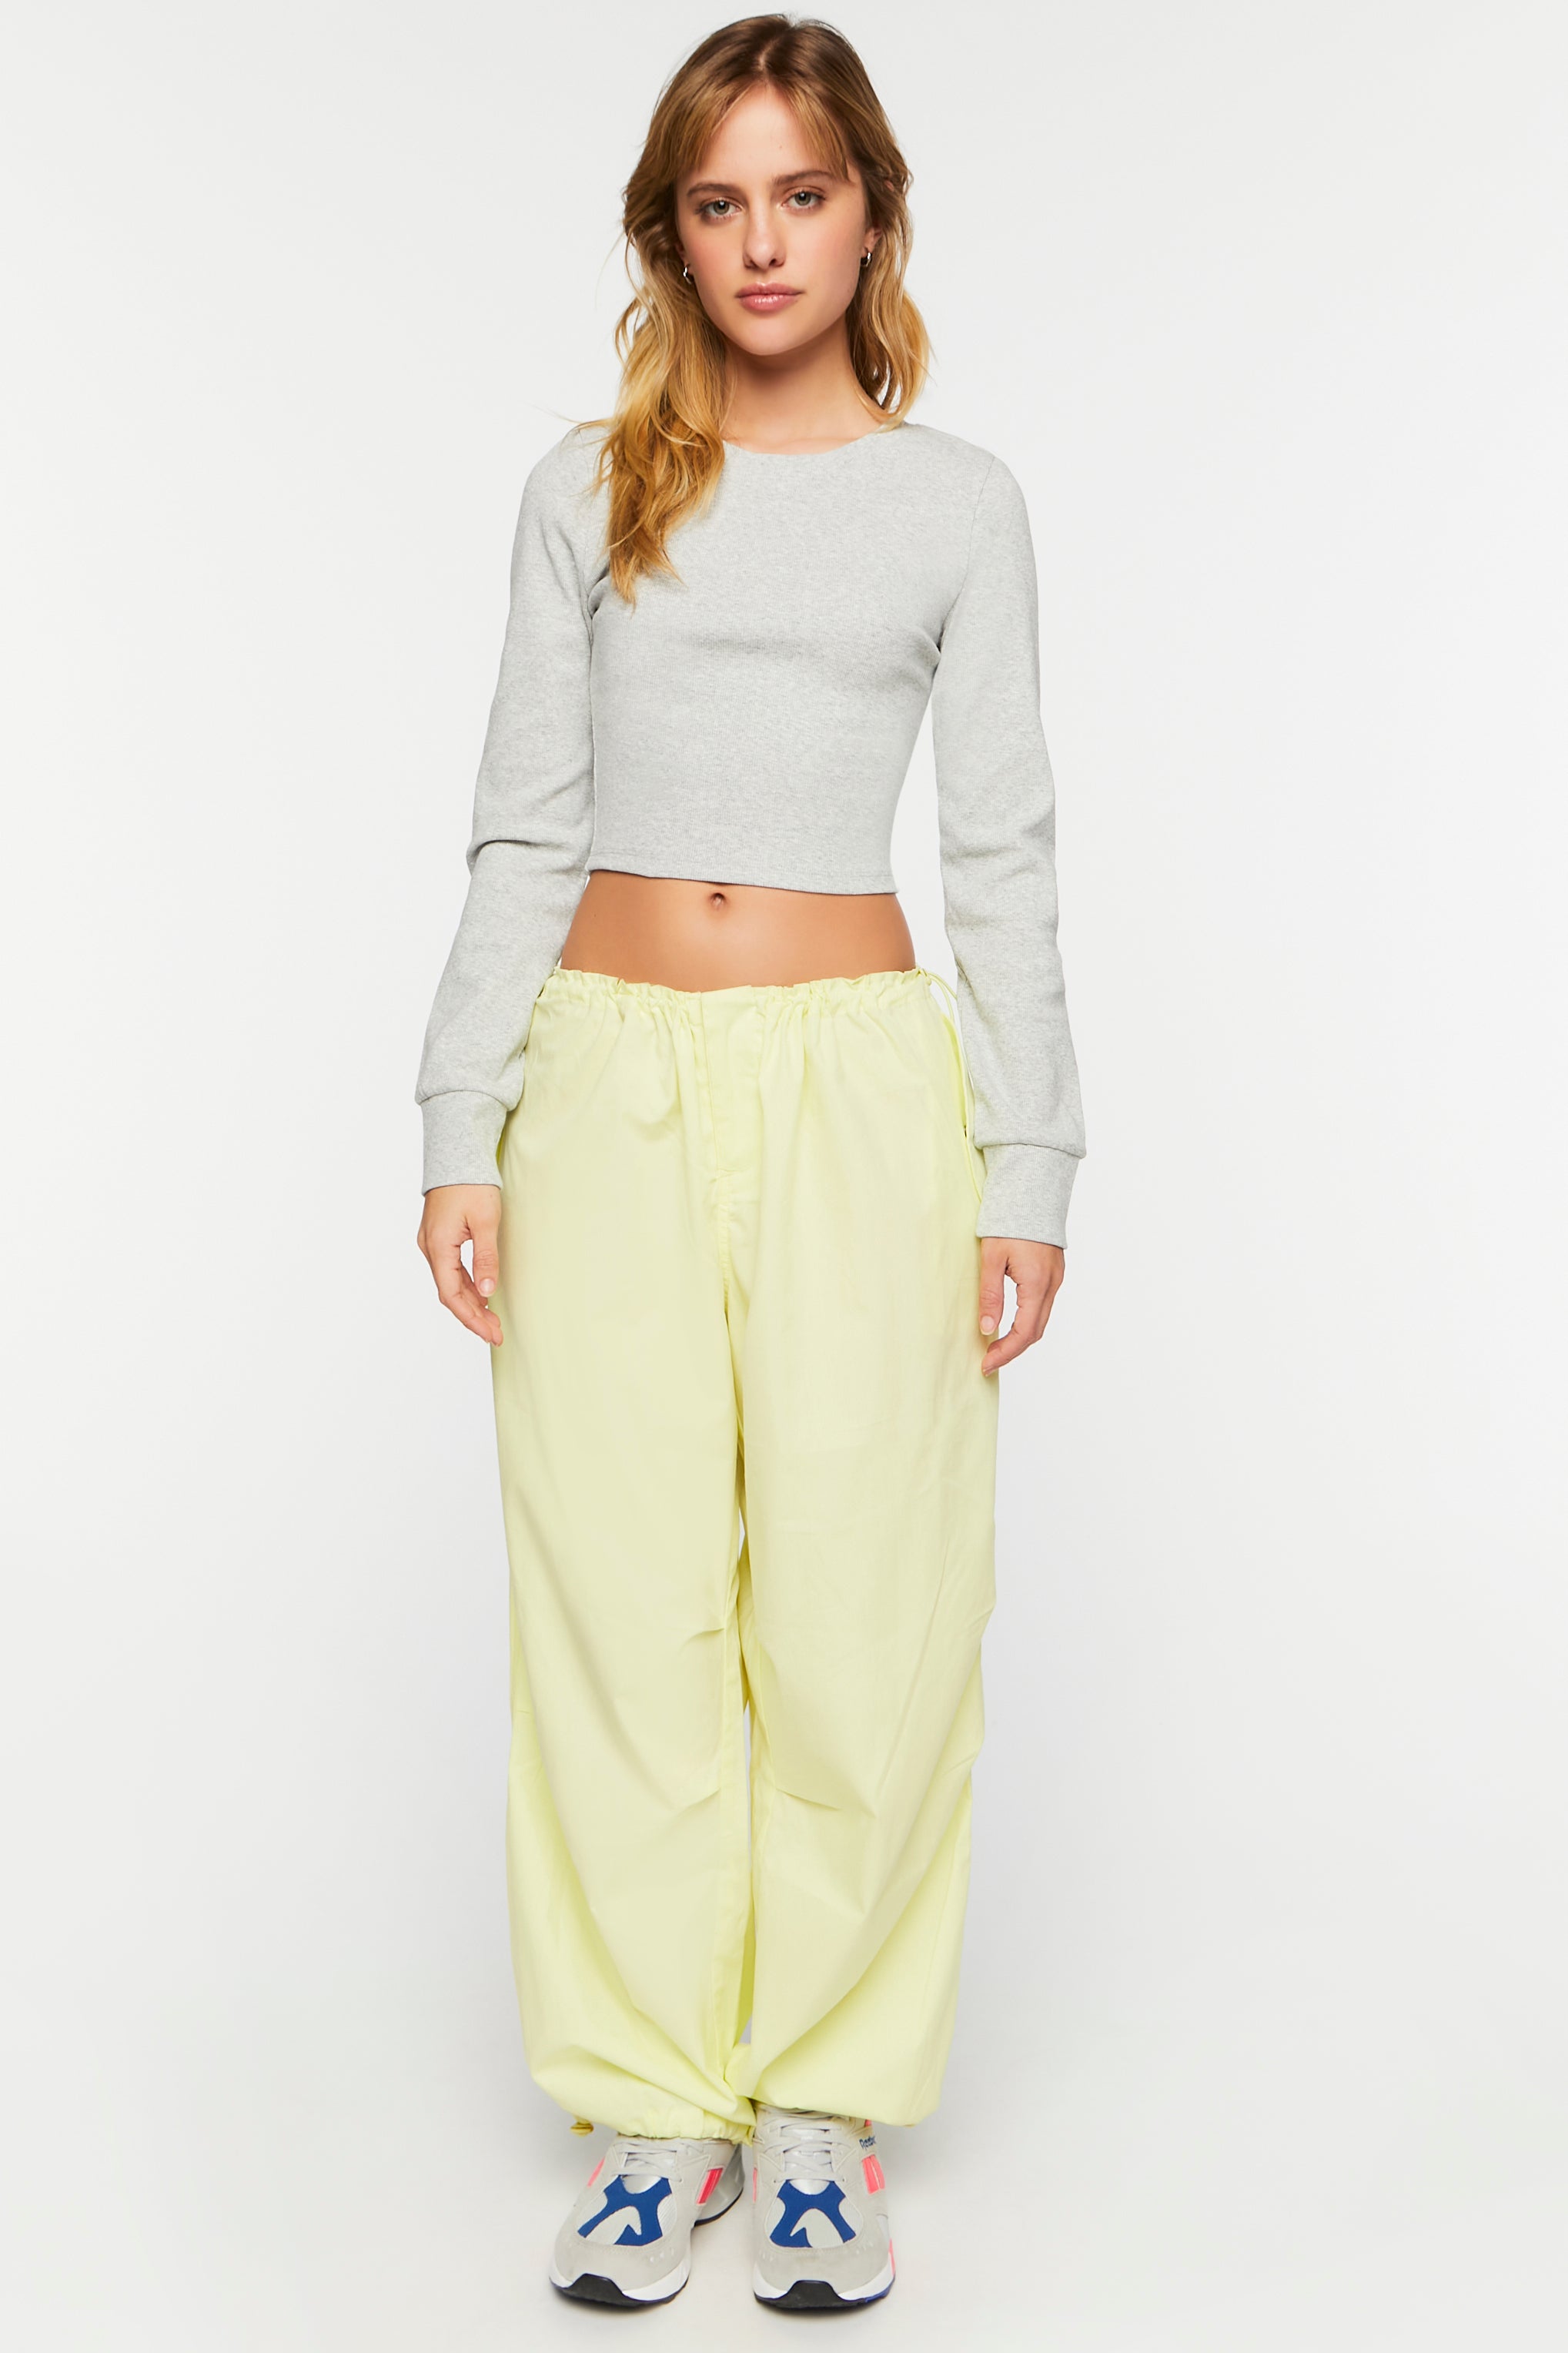 Shop For Ribbed Long-Sleeve Crop Top